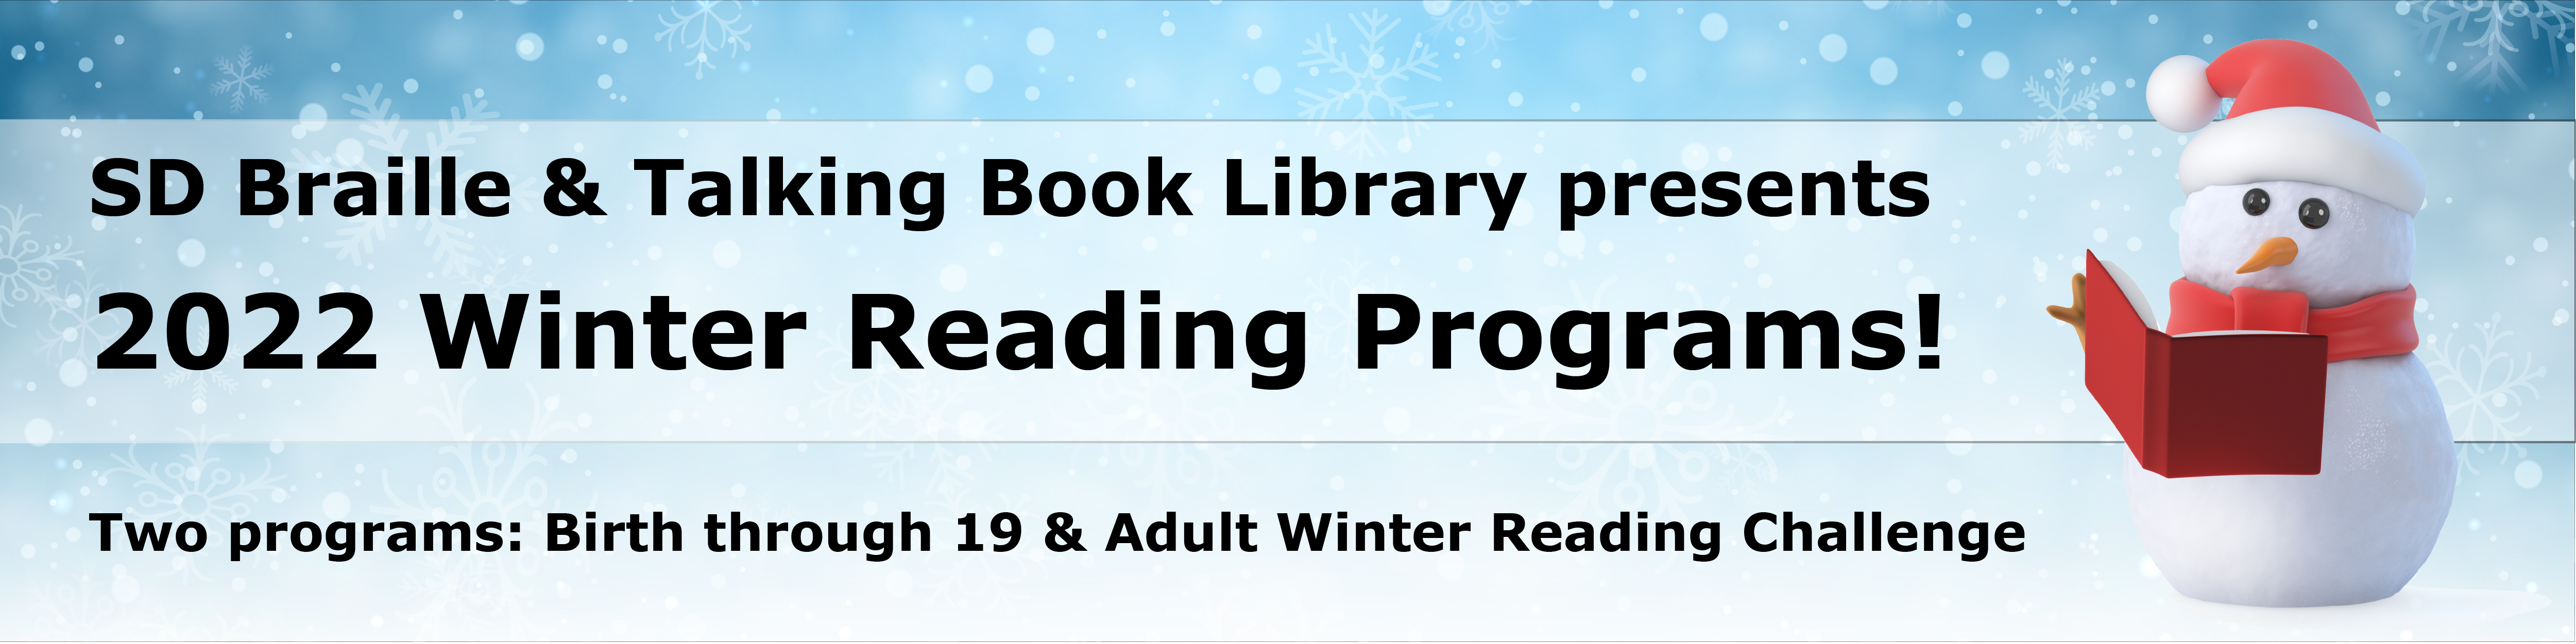 winter reading program banner with snowman reading a book